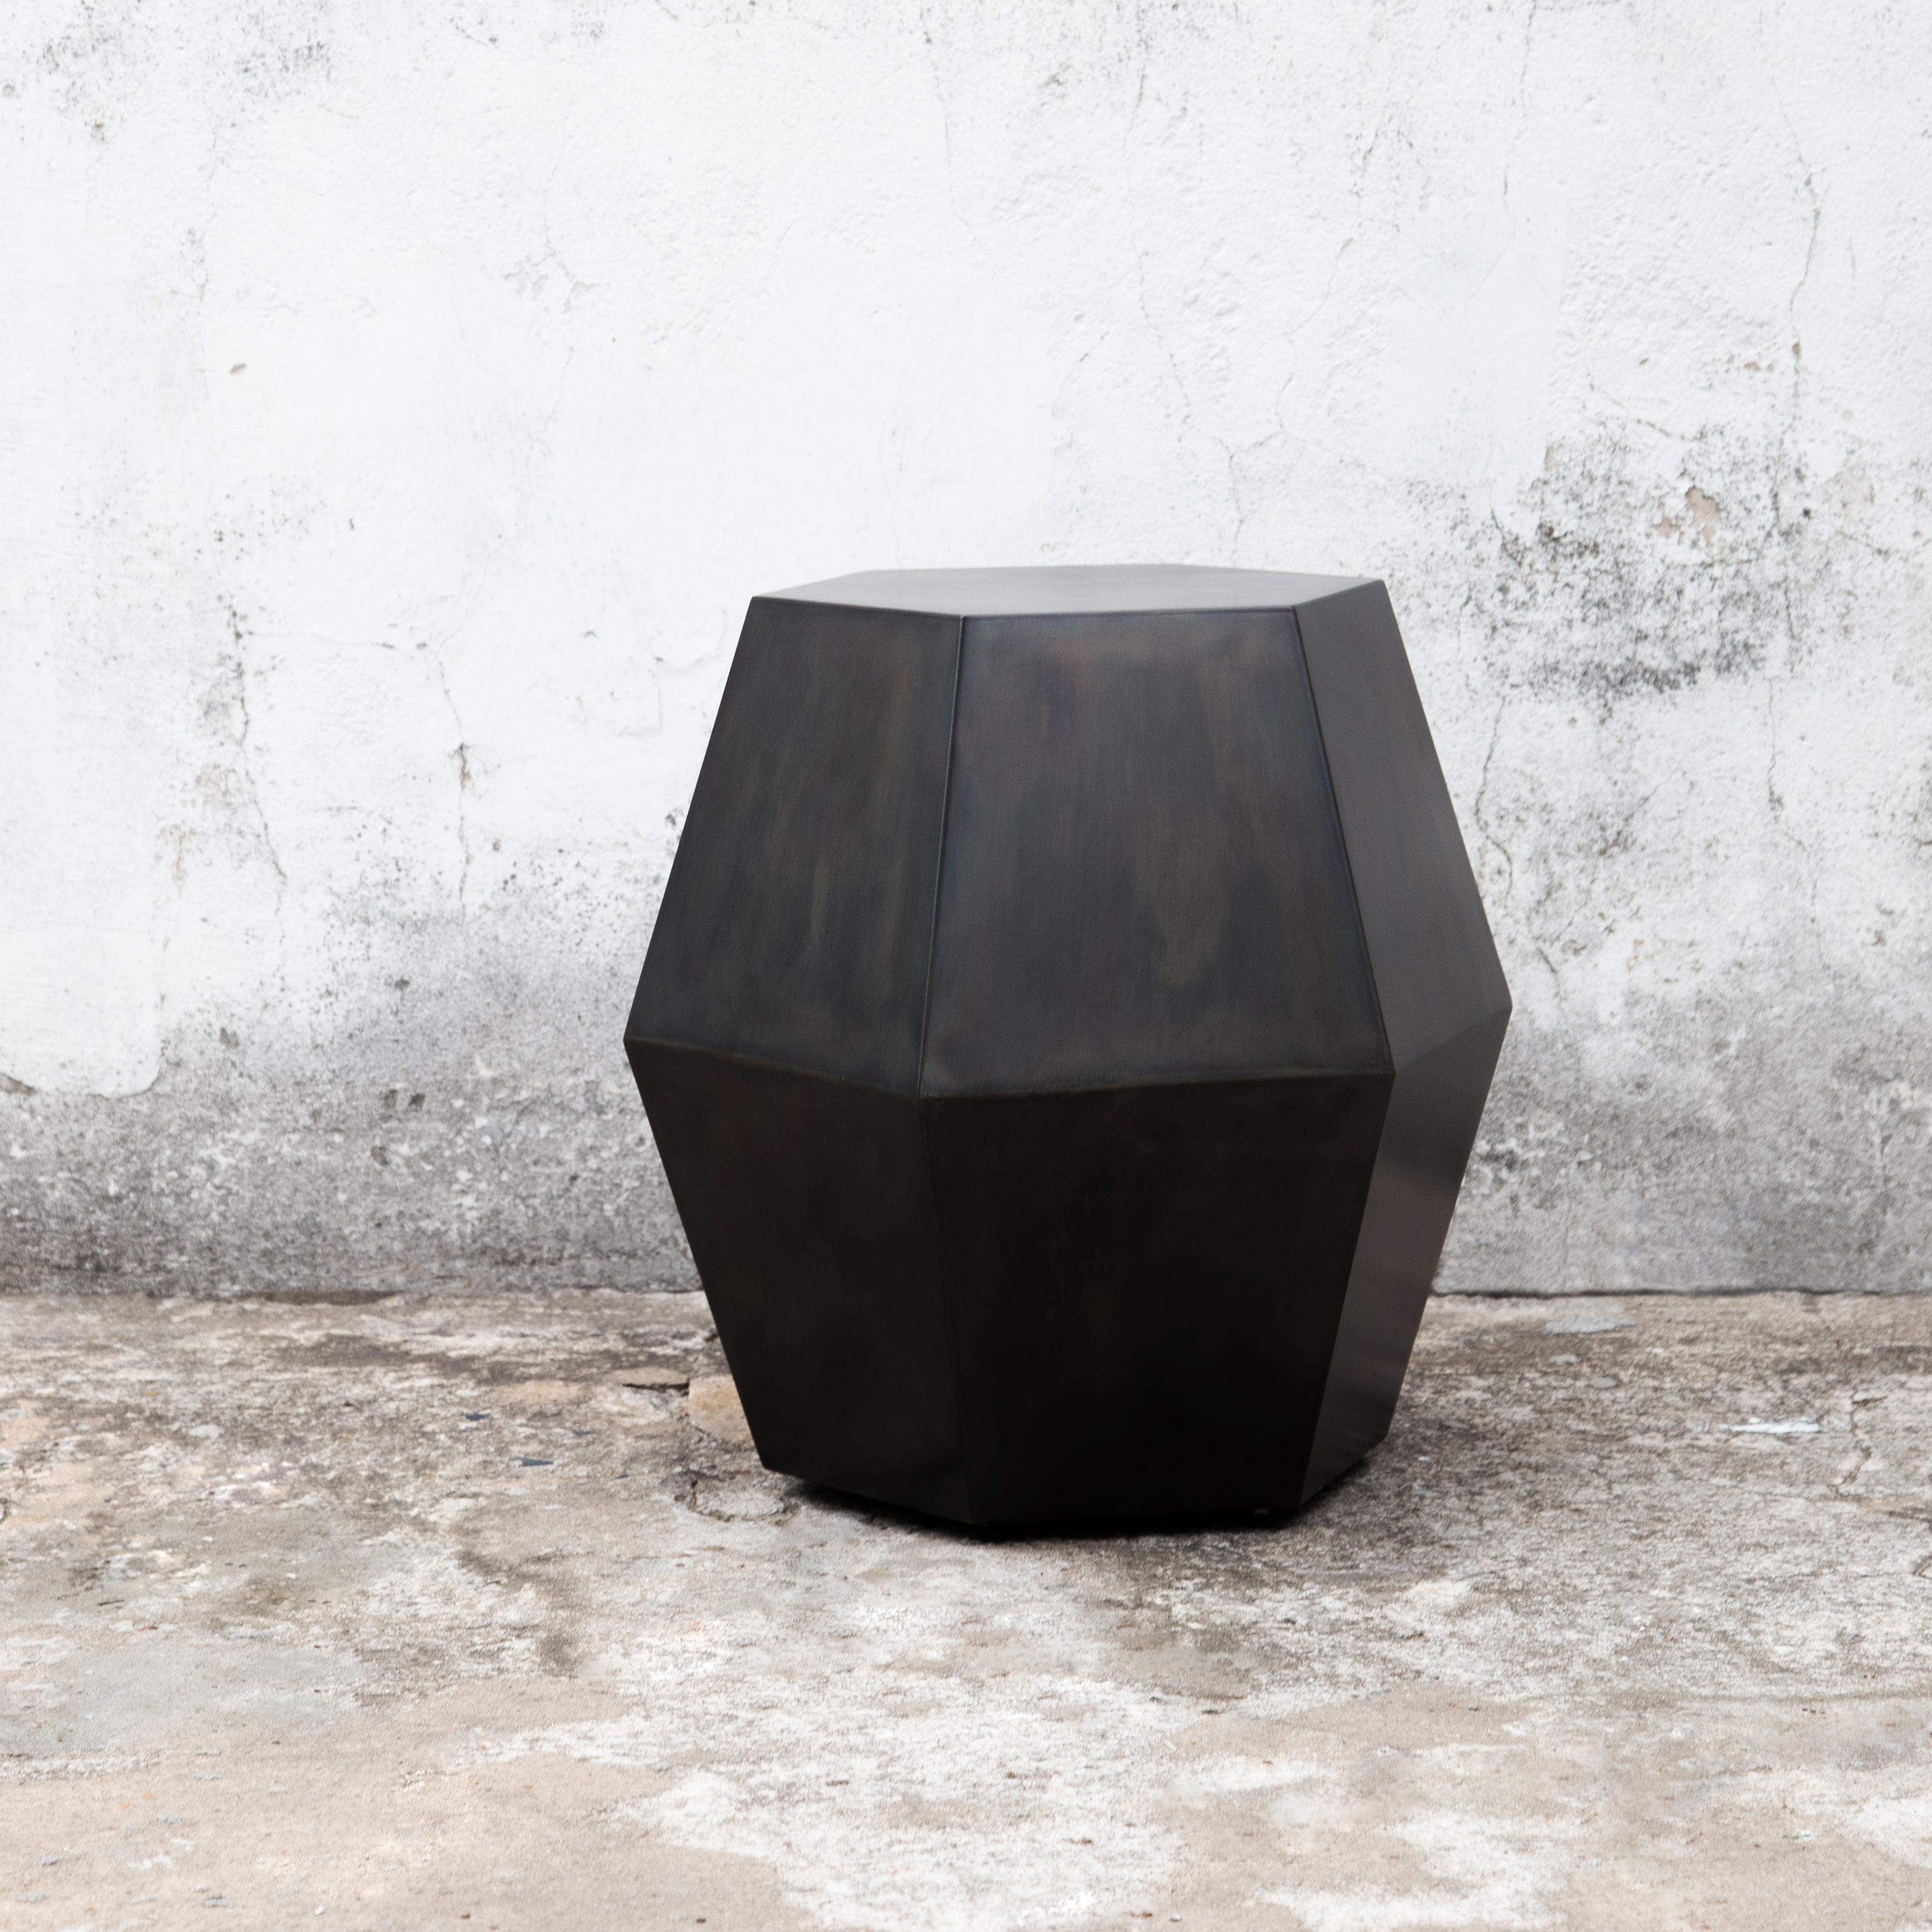 The name of the Tamino Hex comes from its hexagonal shape and can be specified in any of Costantini’s available materials and finishes. Shown here in burnished steel, these side tables feature a modern, geometric shape that allows the subtle